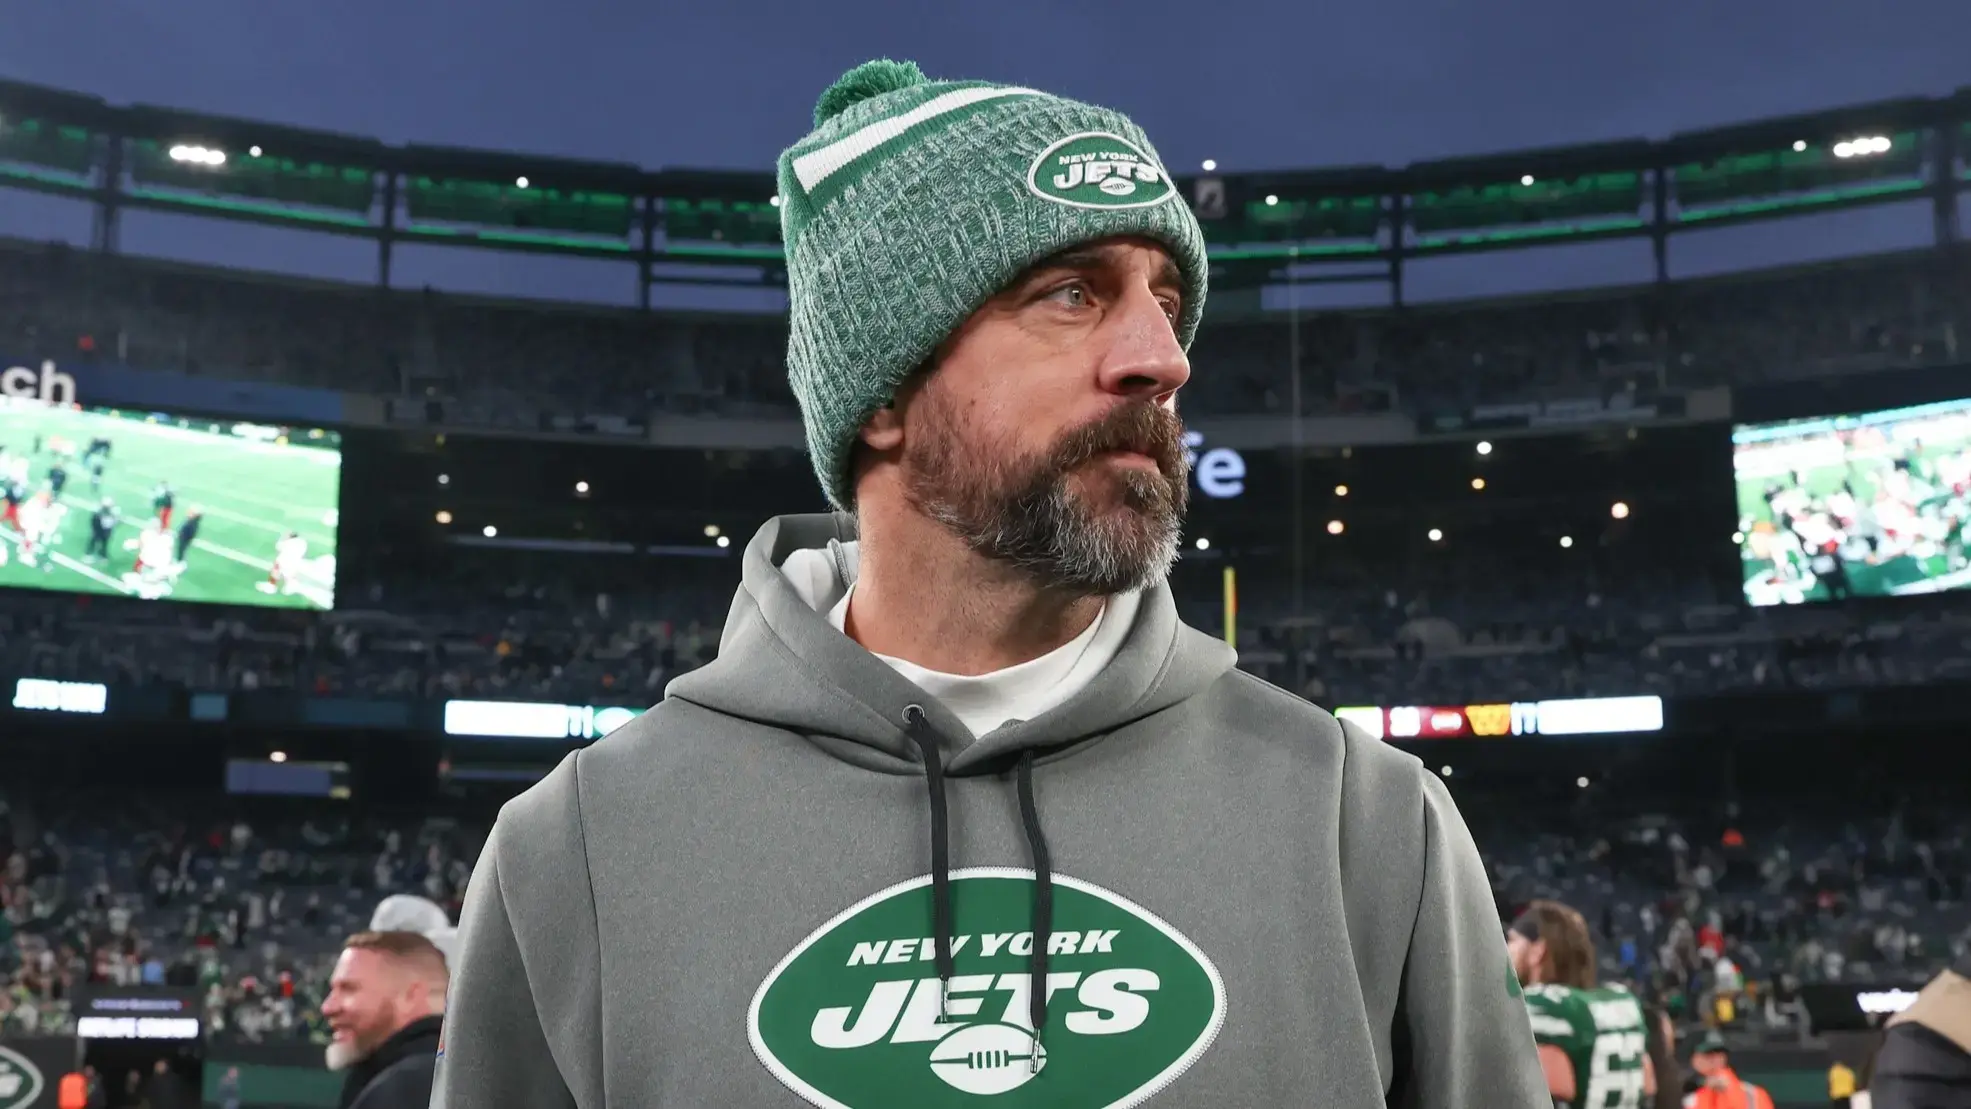 Jets' Aaron Rodgers discusses going to Egypt during 'arbitrarily' decided minicamp dates